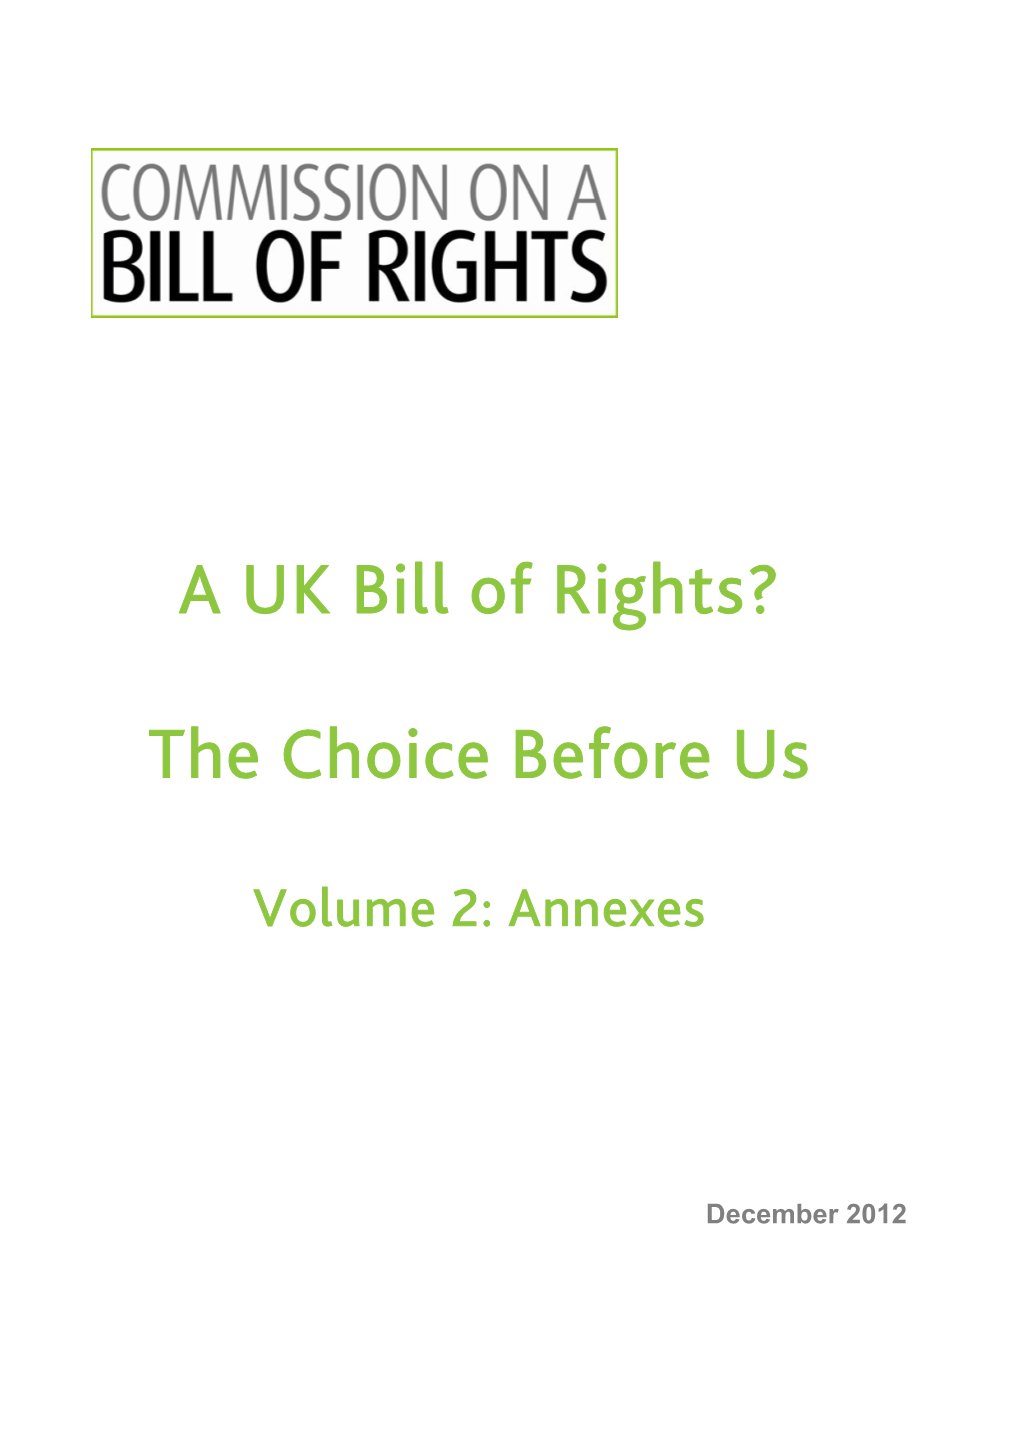 A UK Bill of Rights? the Choice Before Us, Volume 2: Annexes | 1